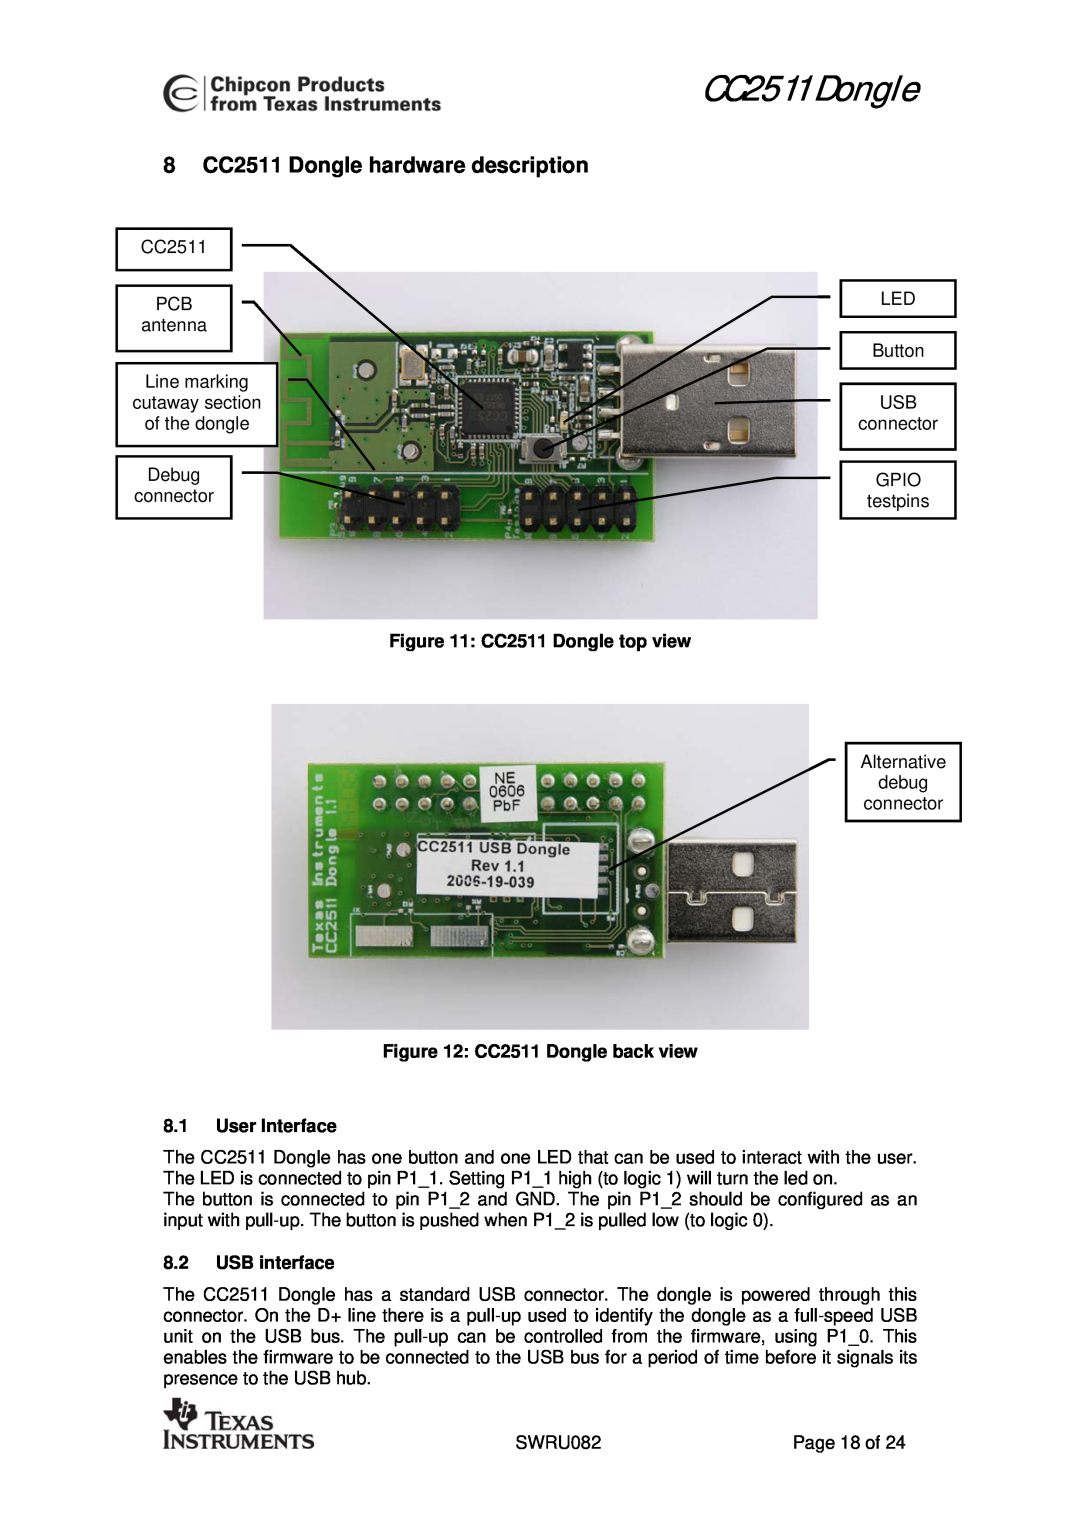 Texas Instruments user manual 8 CC2511 Dongle hardware description, CC2511 Dongle top view, USB interface 